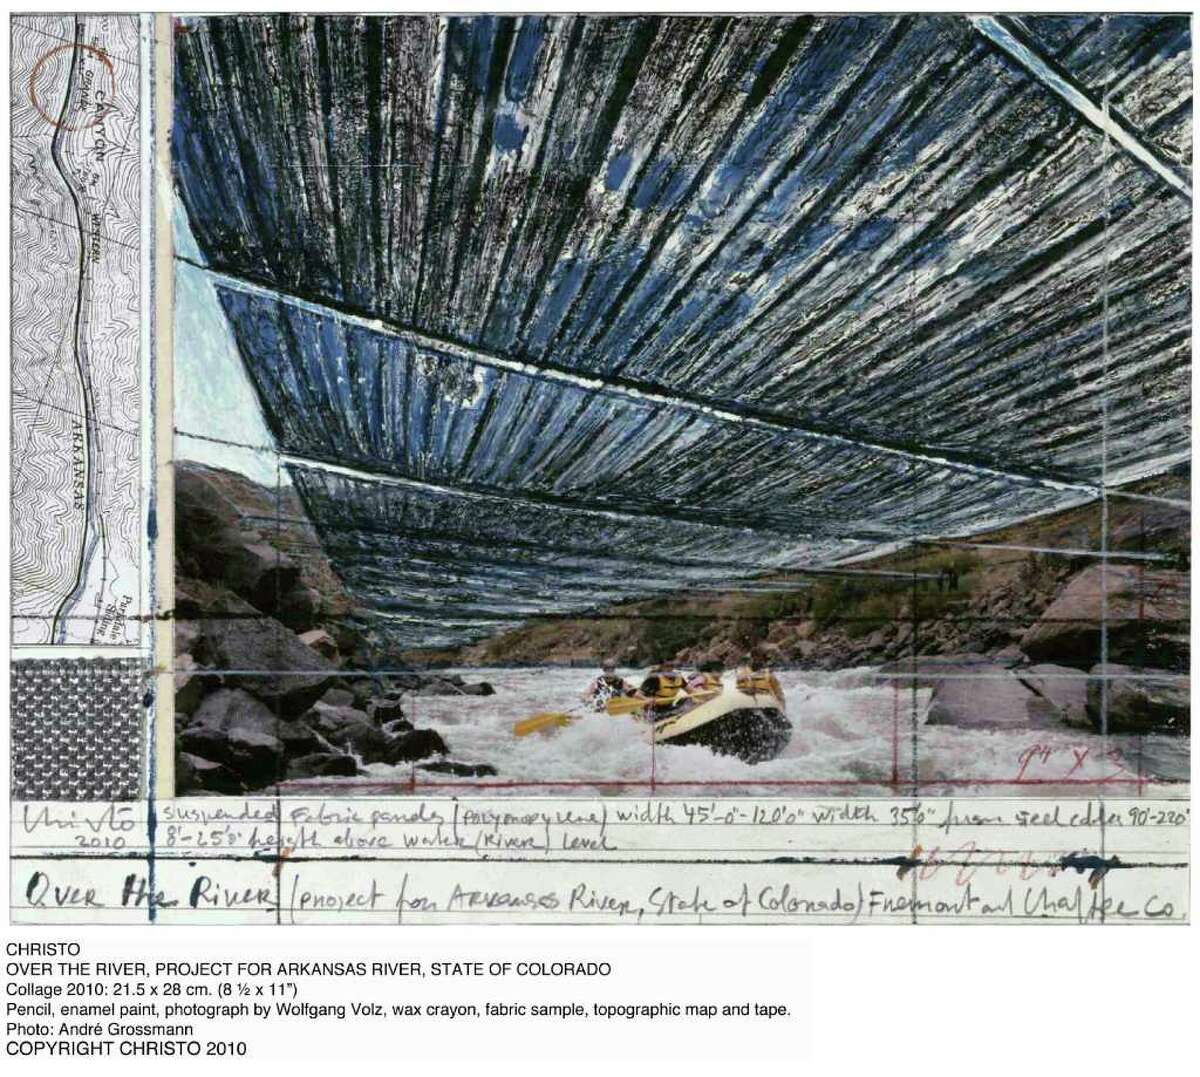 The Westport Arts Center will feature two works in progress by environmental artists Christo and the late Jeanne-Claude, from Thursday, June 30 through Sunday, Sept. 4. The exhibit includes collages outlining “Over the River, Project for the Arkansas River, State of Colorado” (above) and “The Mastaba, Project for the United Arab Emirates.”